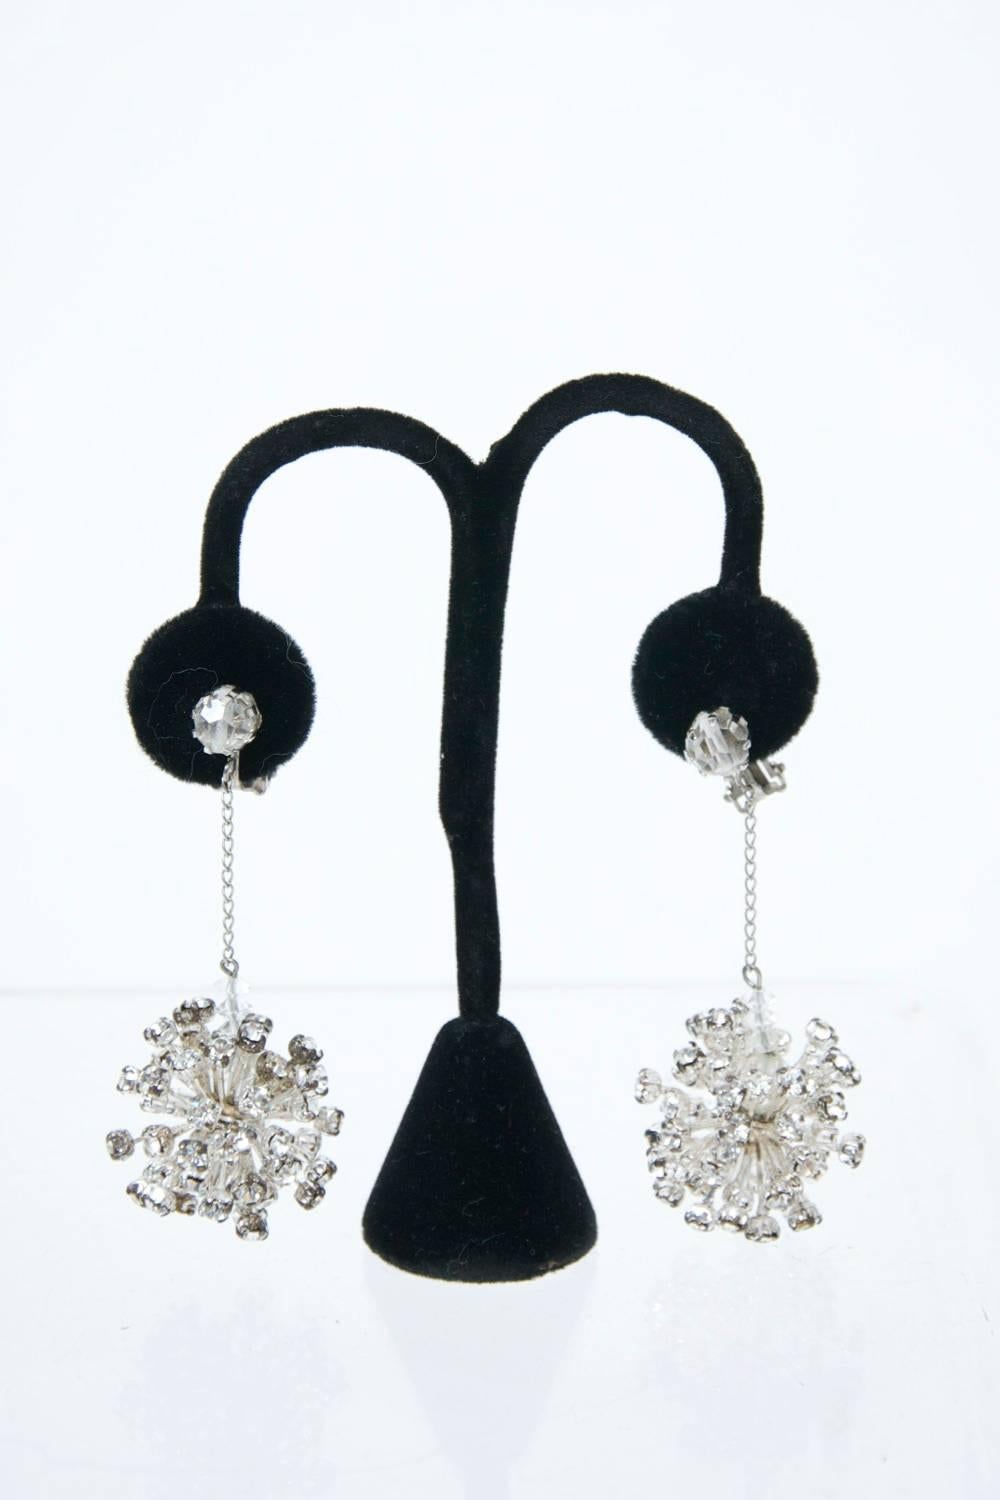 1960s atomic drop earrings, each sphere consisting of varied lengths of protrusions terminating in a rhinestone. The spheres are suspended by a thin silver chain from a single rhinestone earpiece. Clip ons. Unmarked.